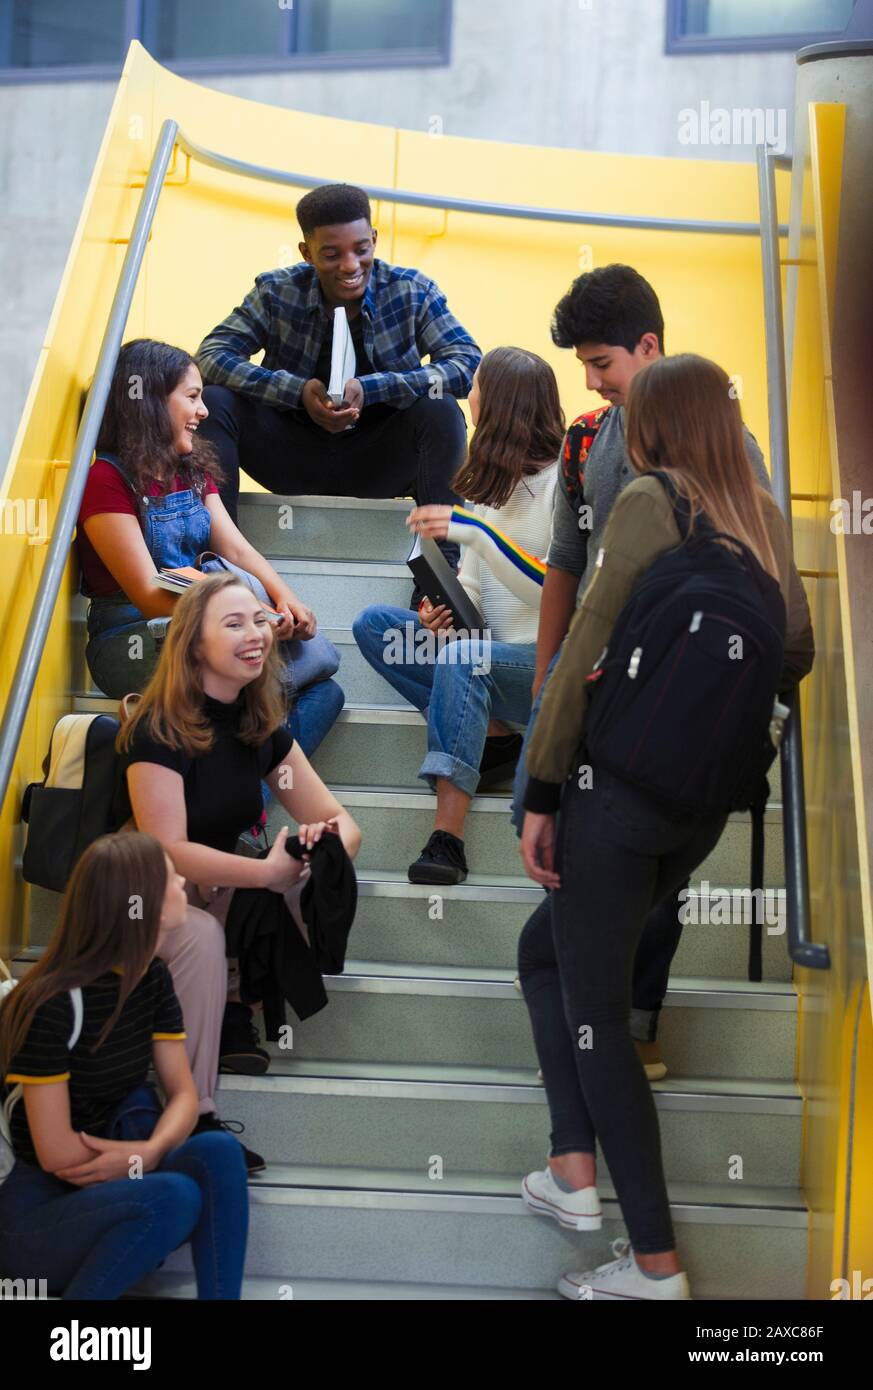 Junior high students hanging out on stairs Stock Photo